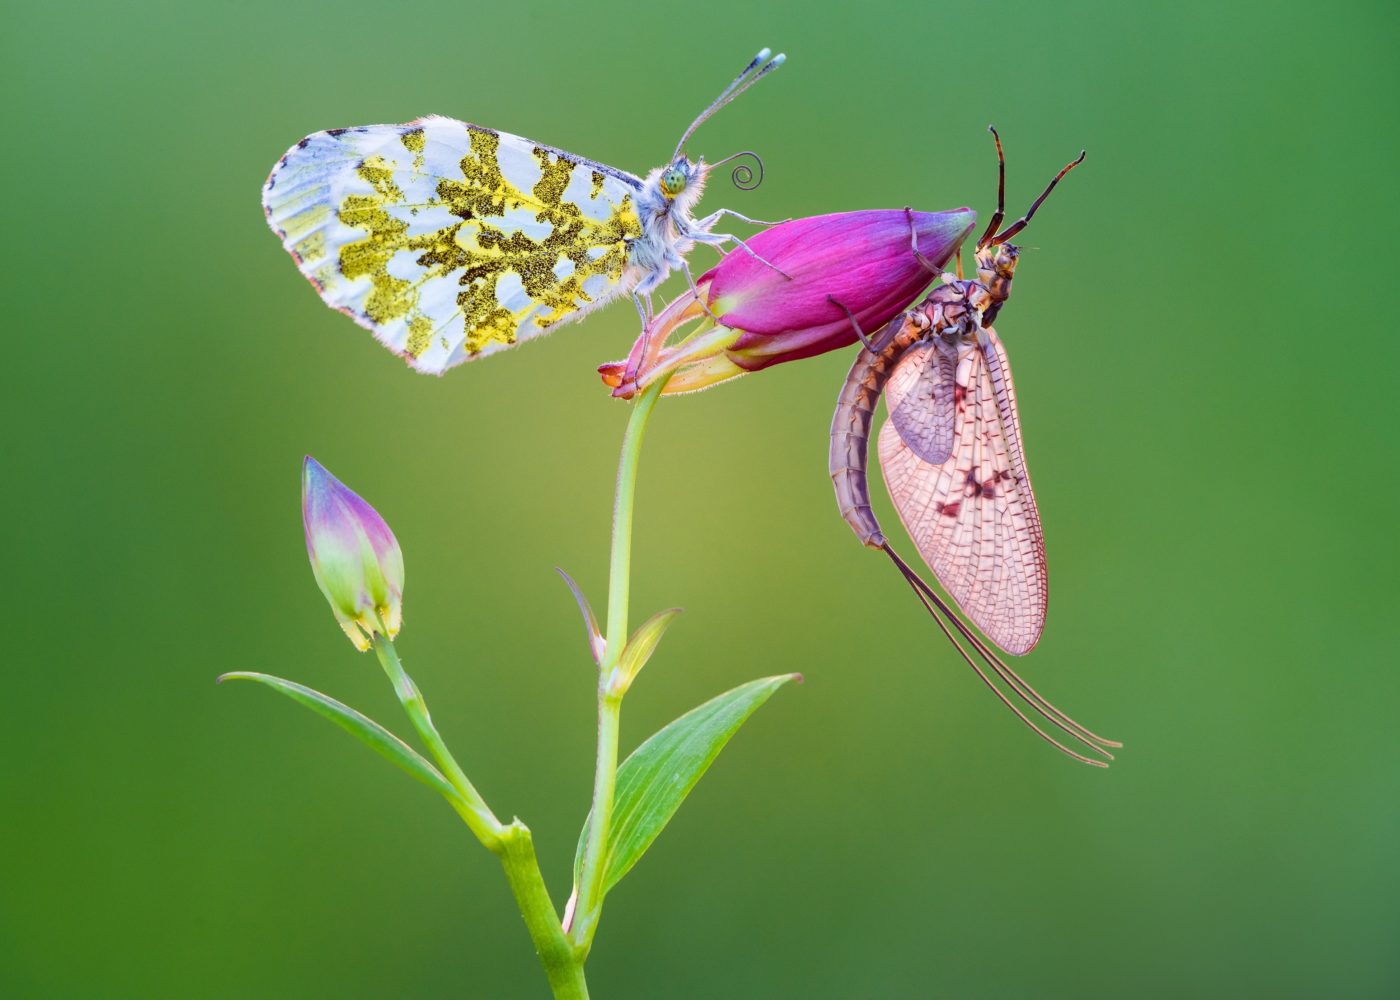 Orange tip butterfly, Anthocharis cardamines, and mayfly on a purple flower bud